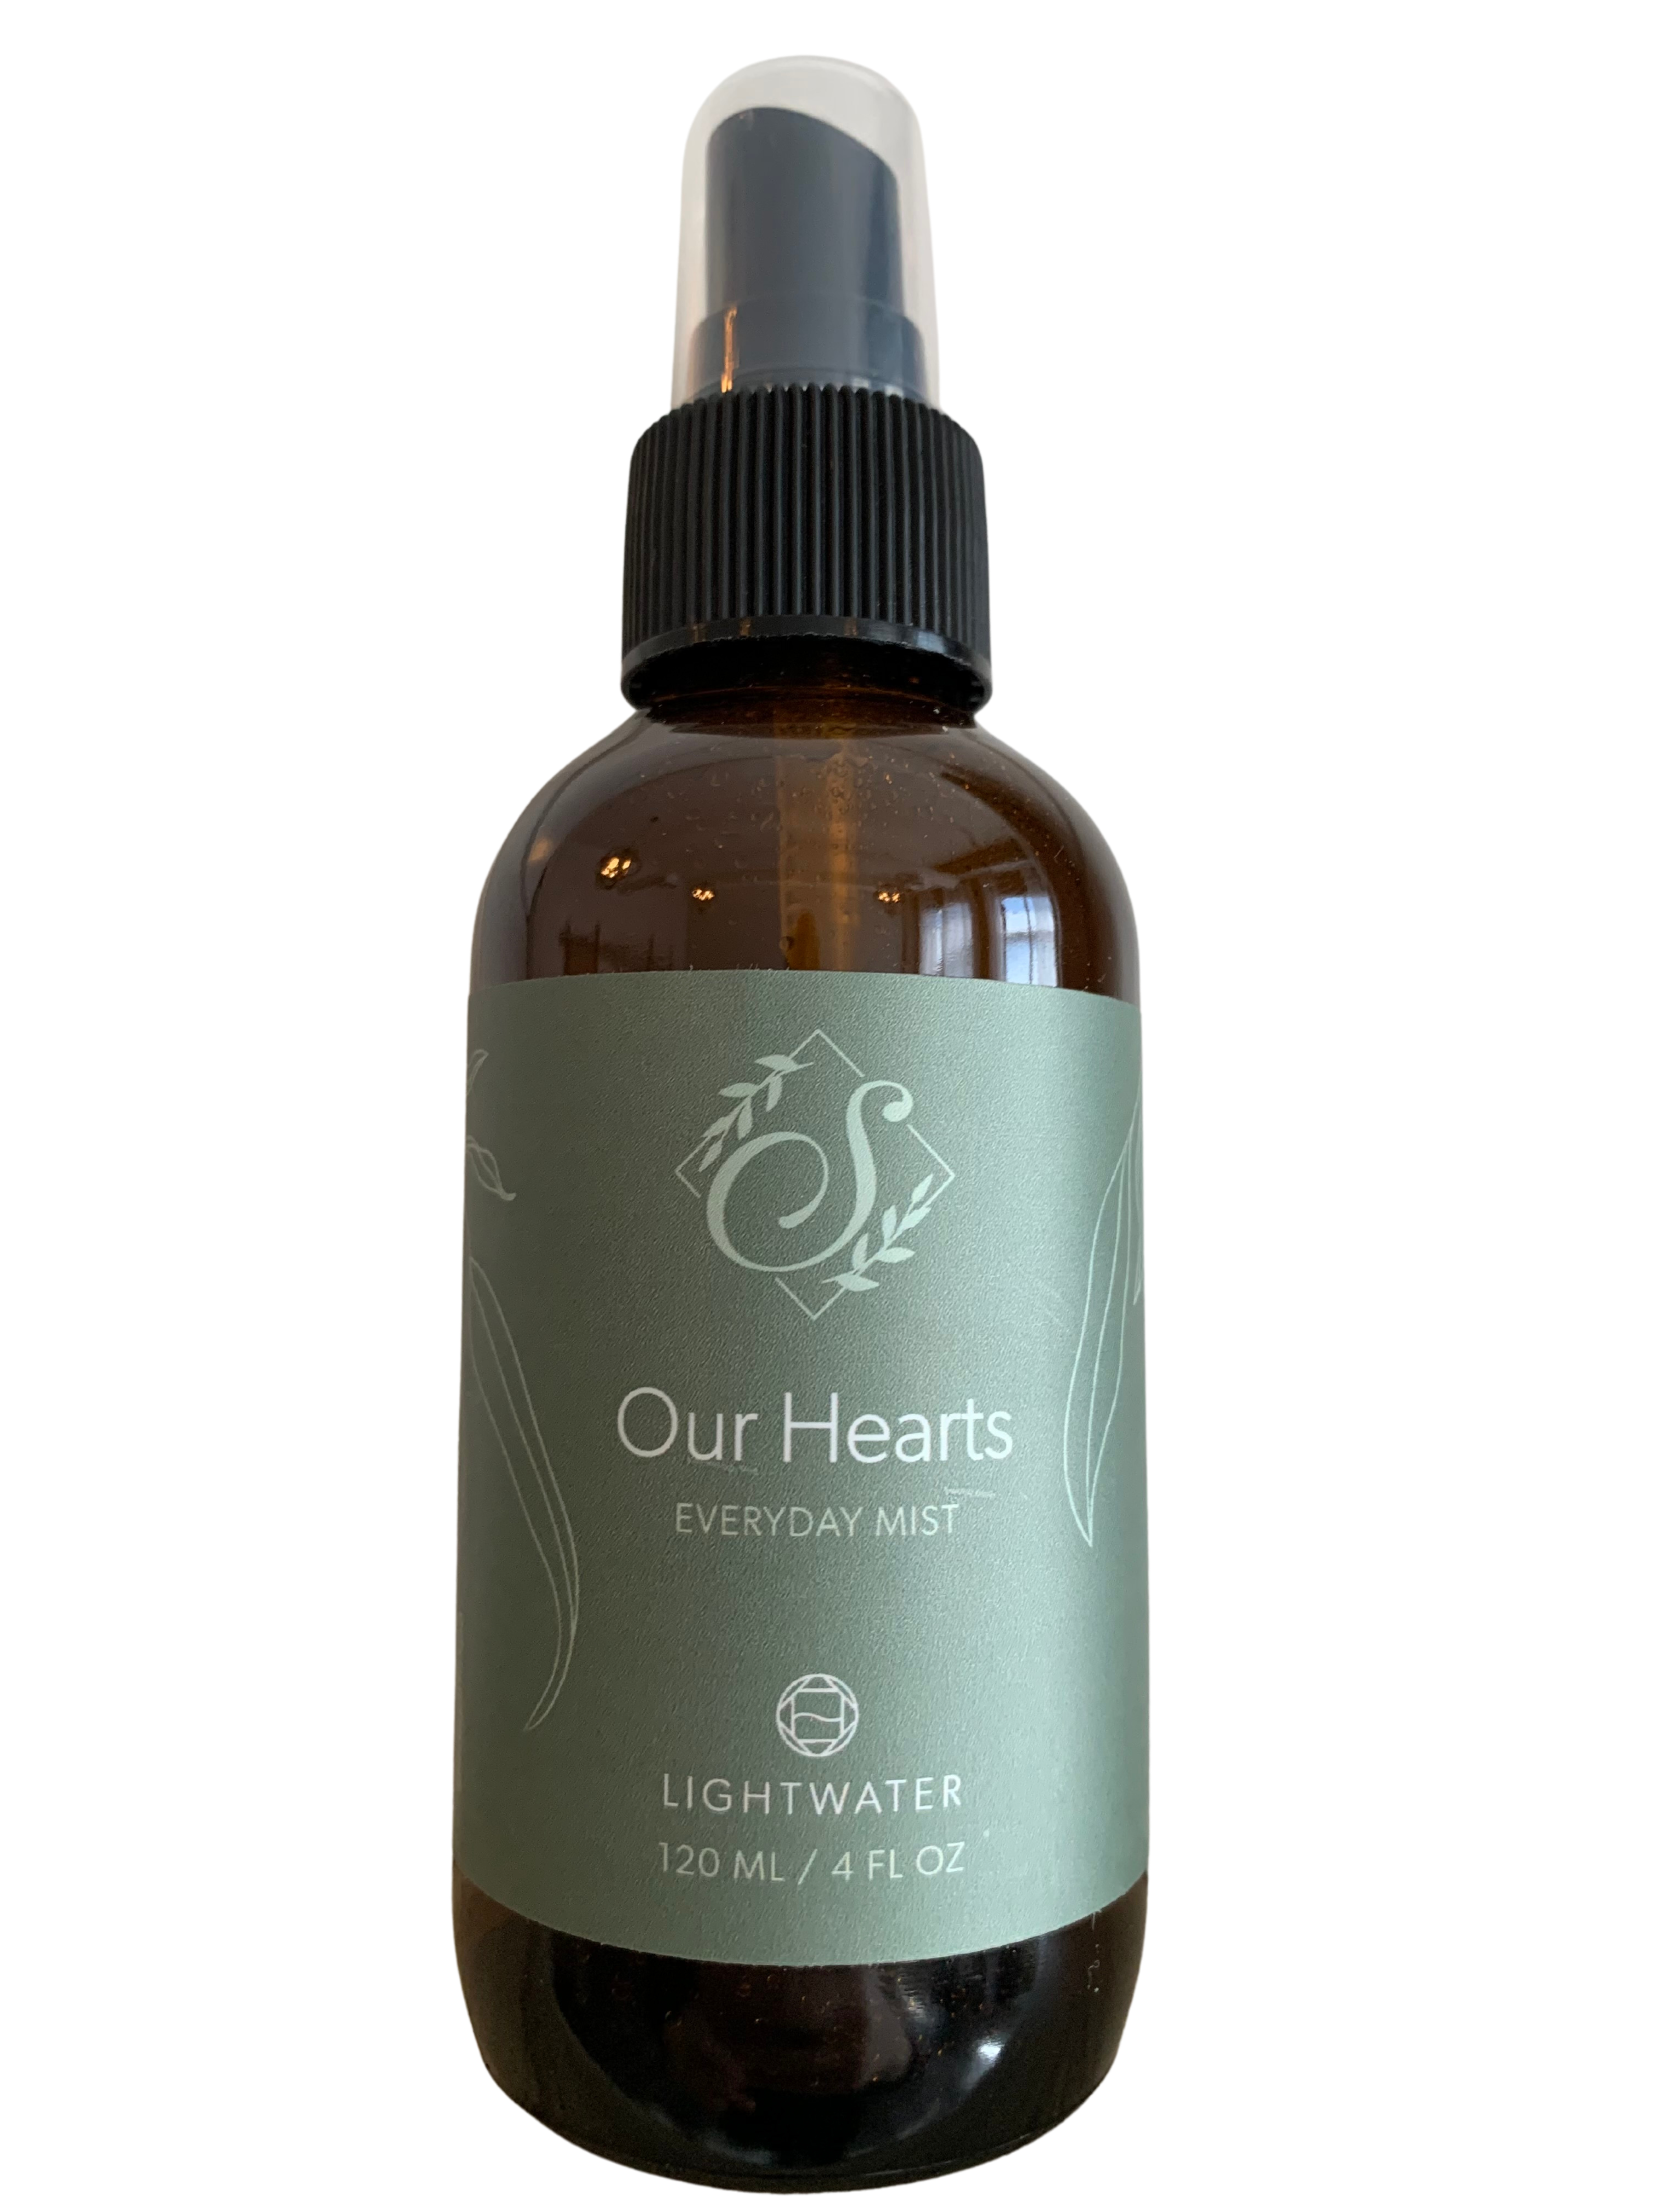 Our Hearts Everyday Mist